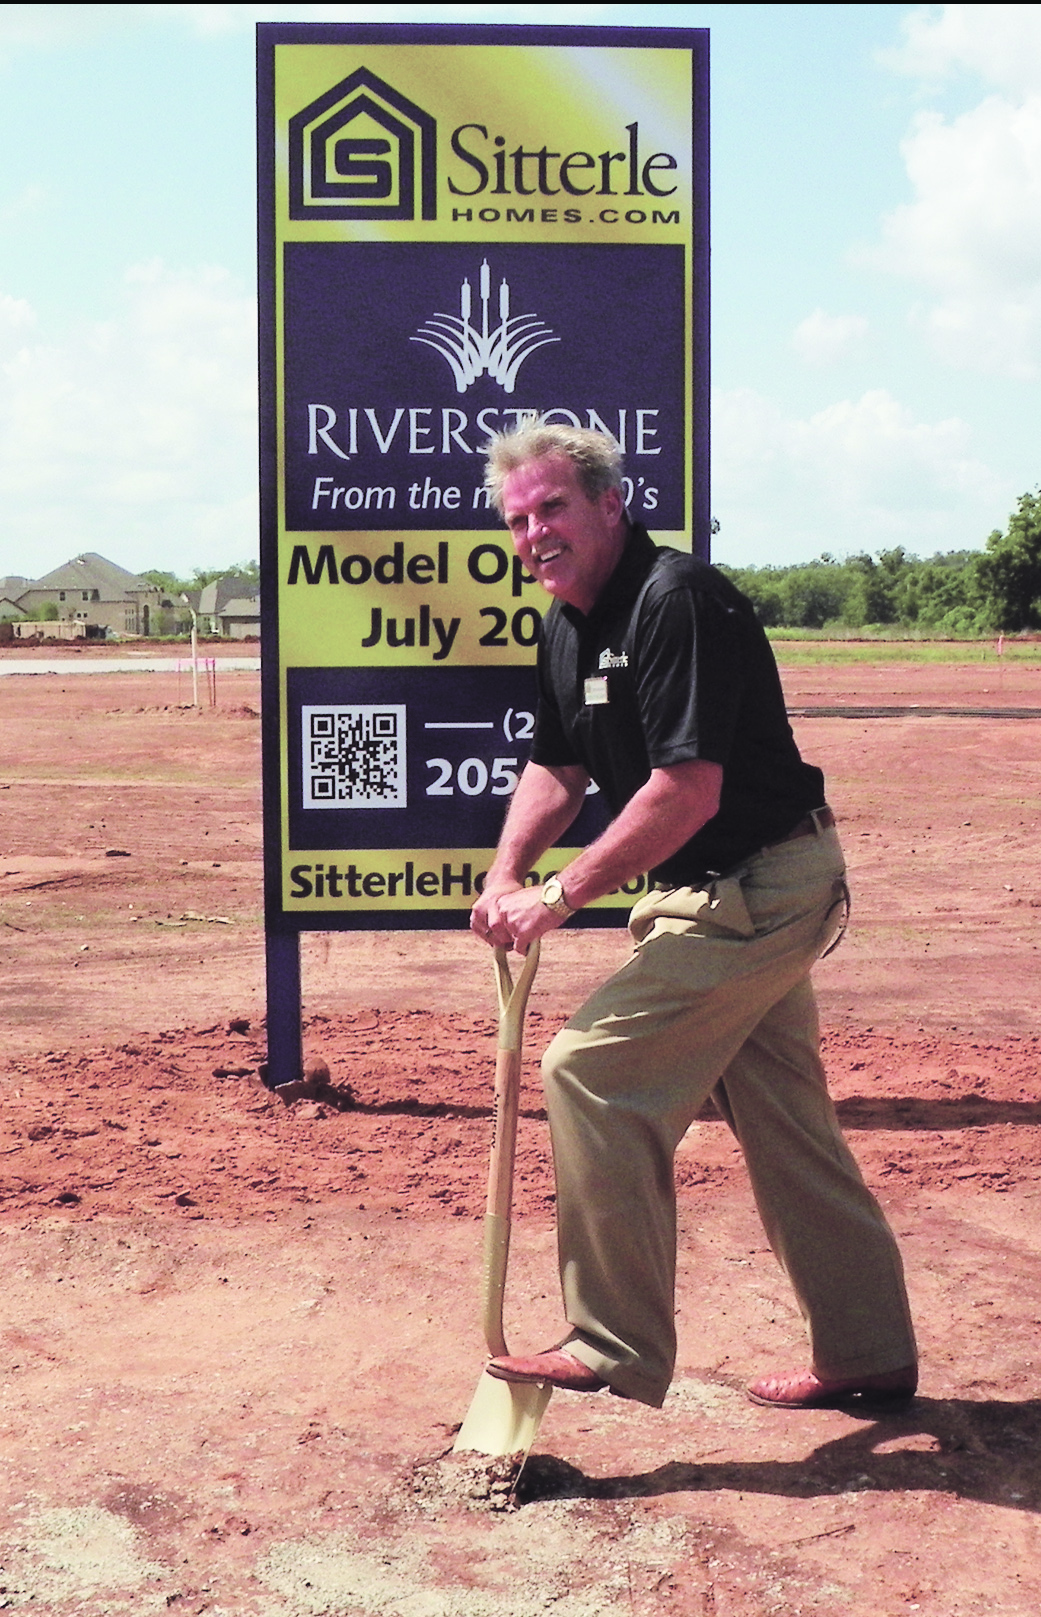 Steve VonHofe, pictured at the groundbreaking event, is leading the expansion of Sitterle Homes into the Houston market.